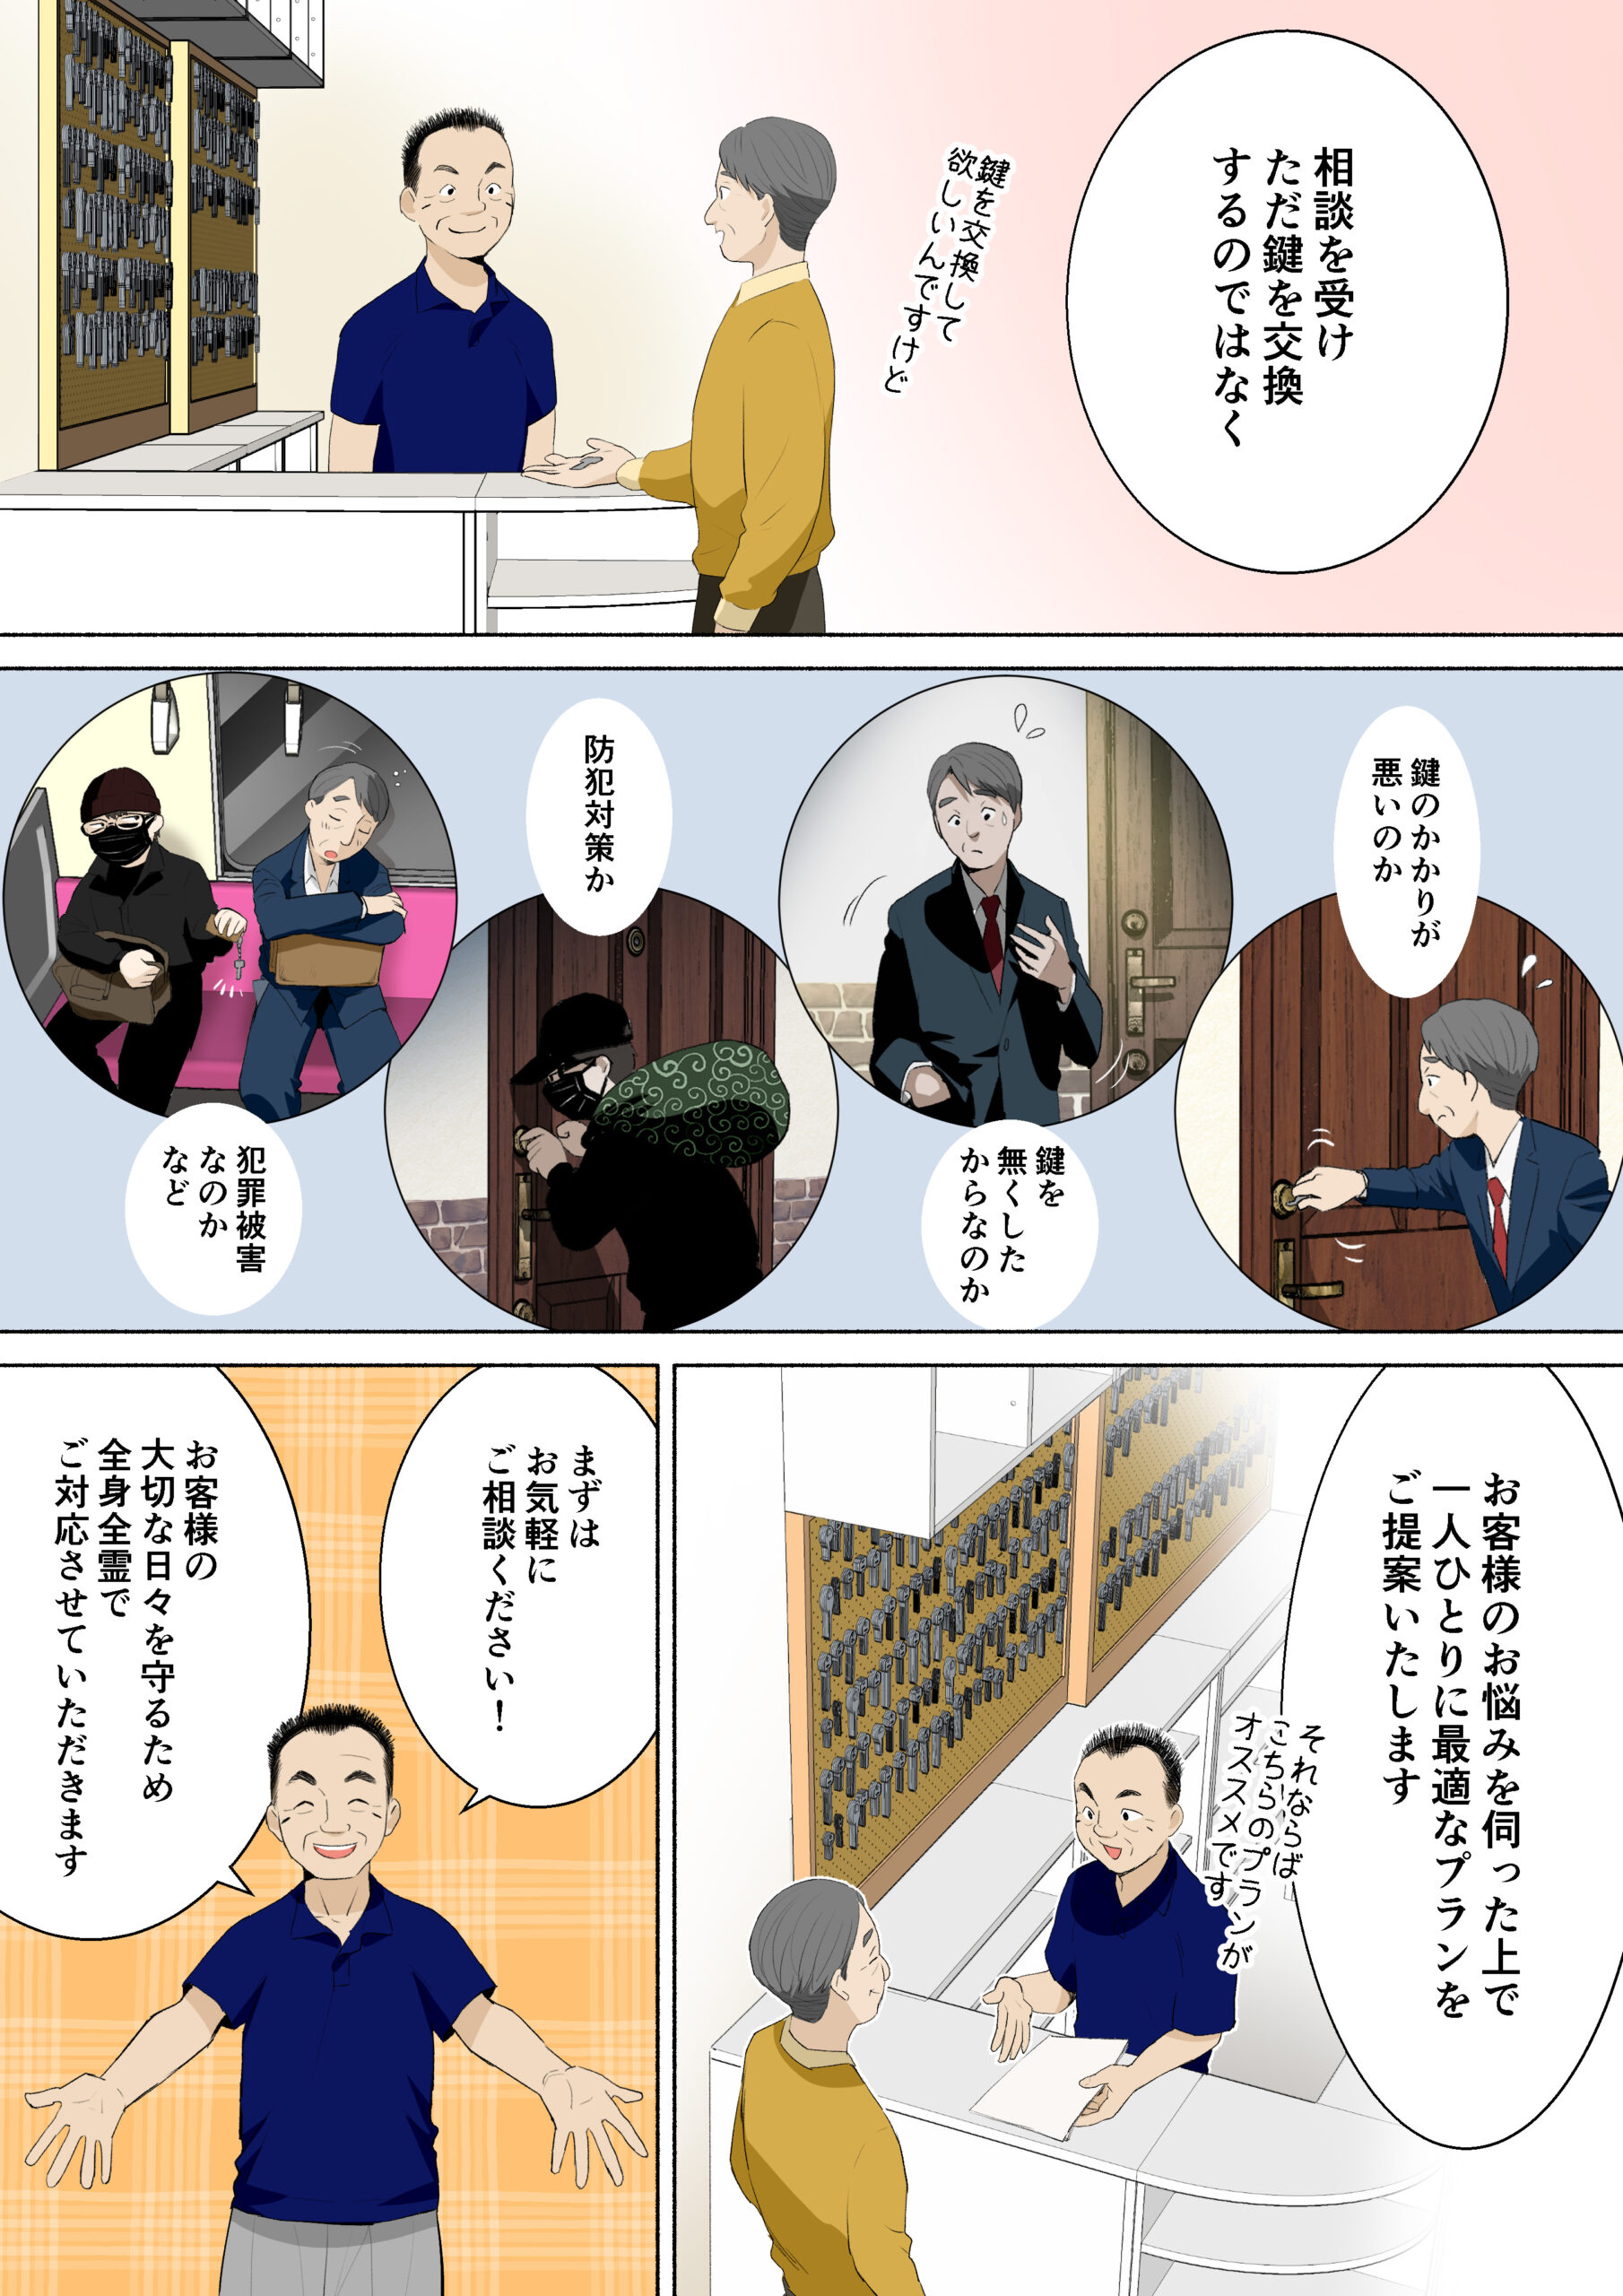 STAYGOLD株式会社 西東京ロックサービスさま紹介漫画